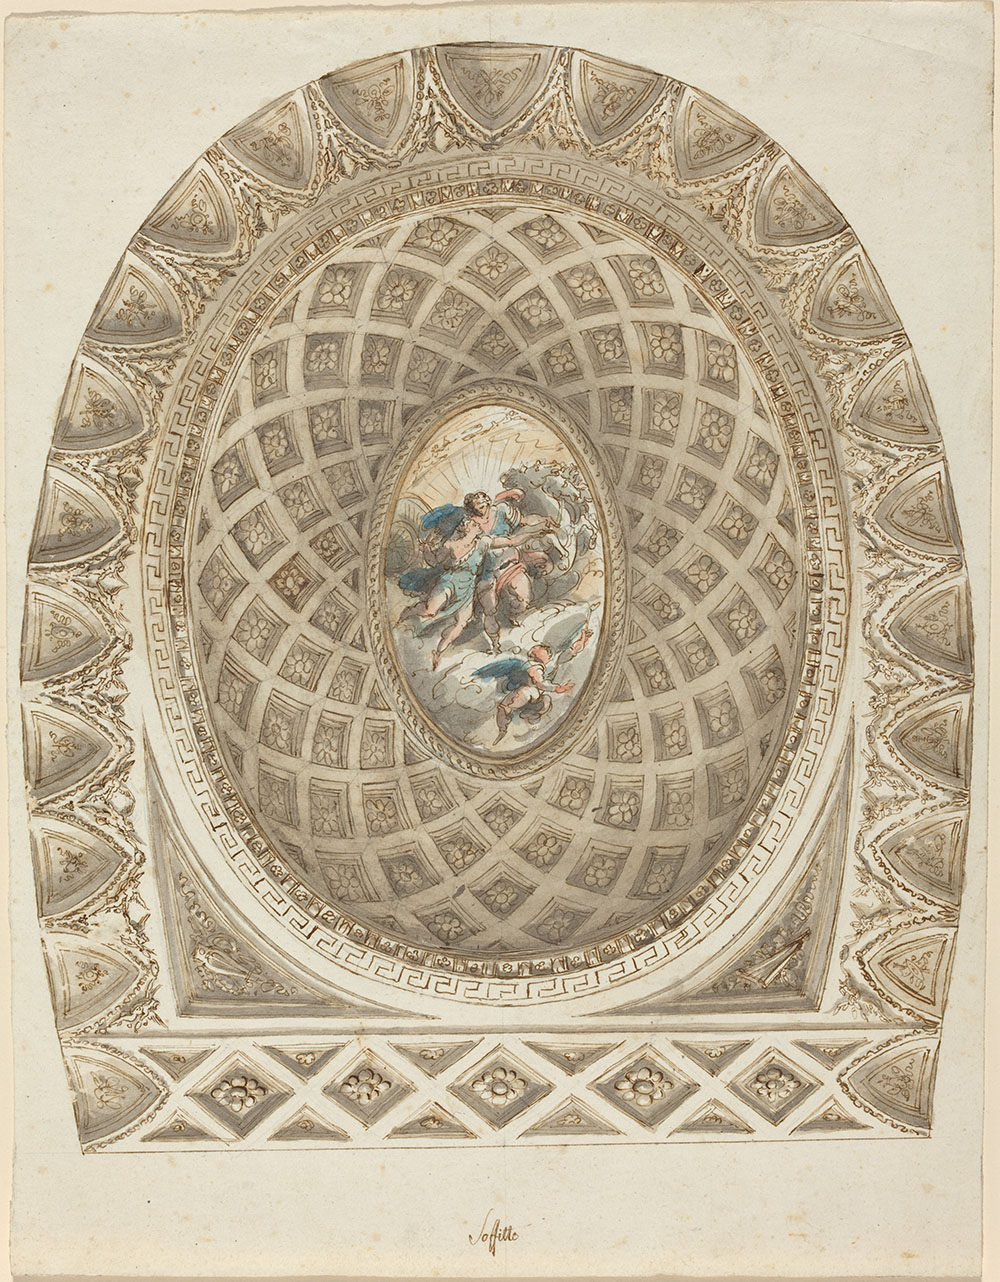 1787_Felice Giani_A Coffered Dome with Apollo and Phaeton_5657-006